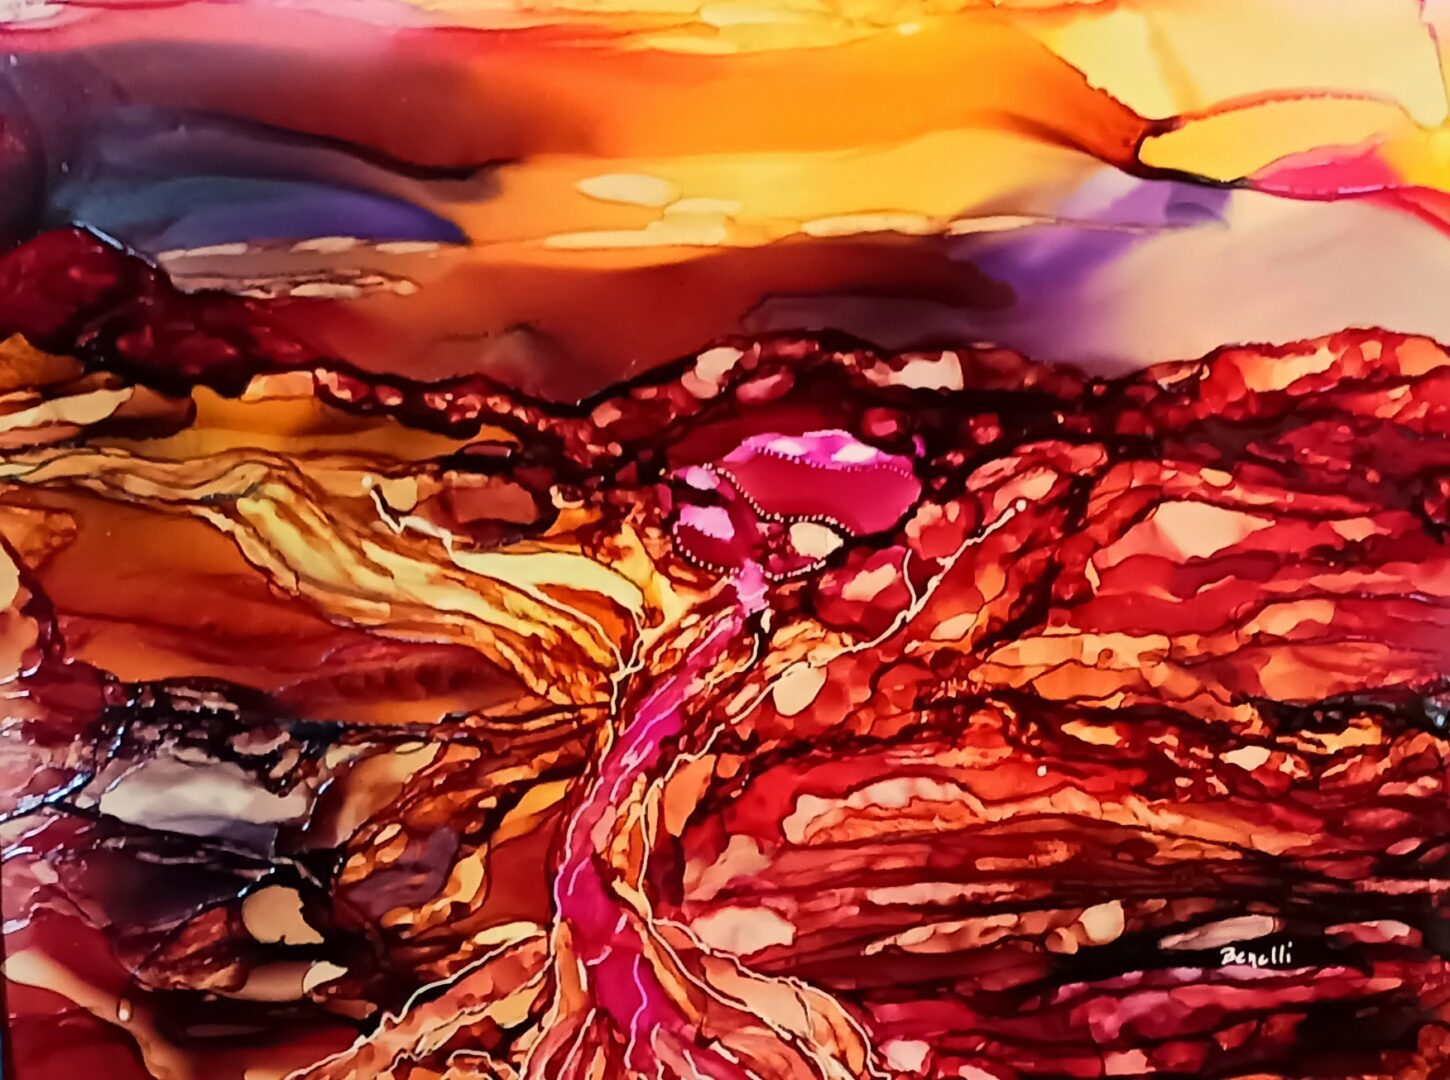 A Flamingo Dancer in the Desert painting of a red, orange, and yellow landscape.